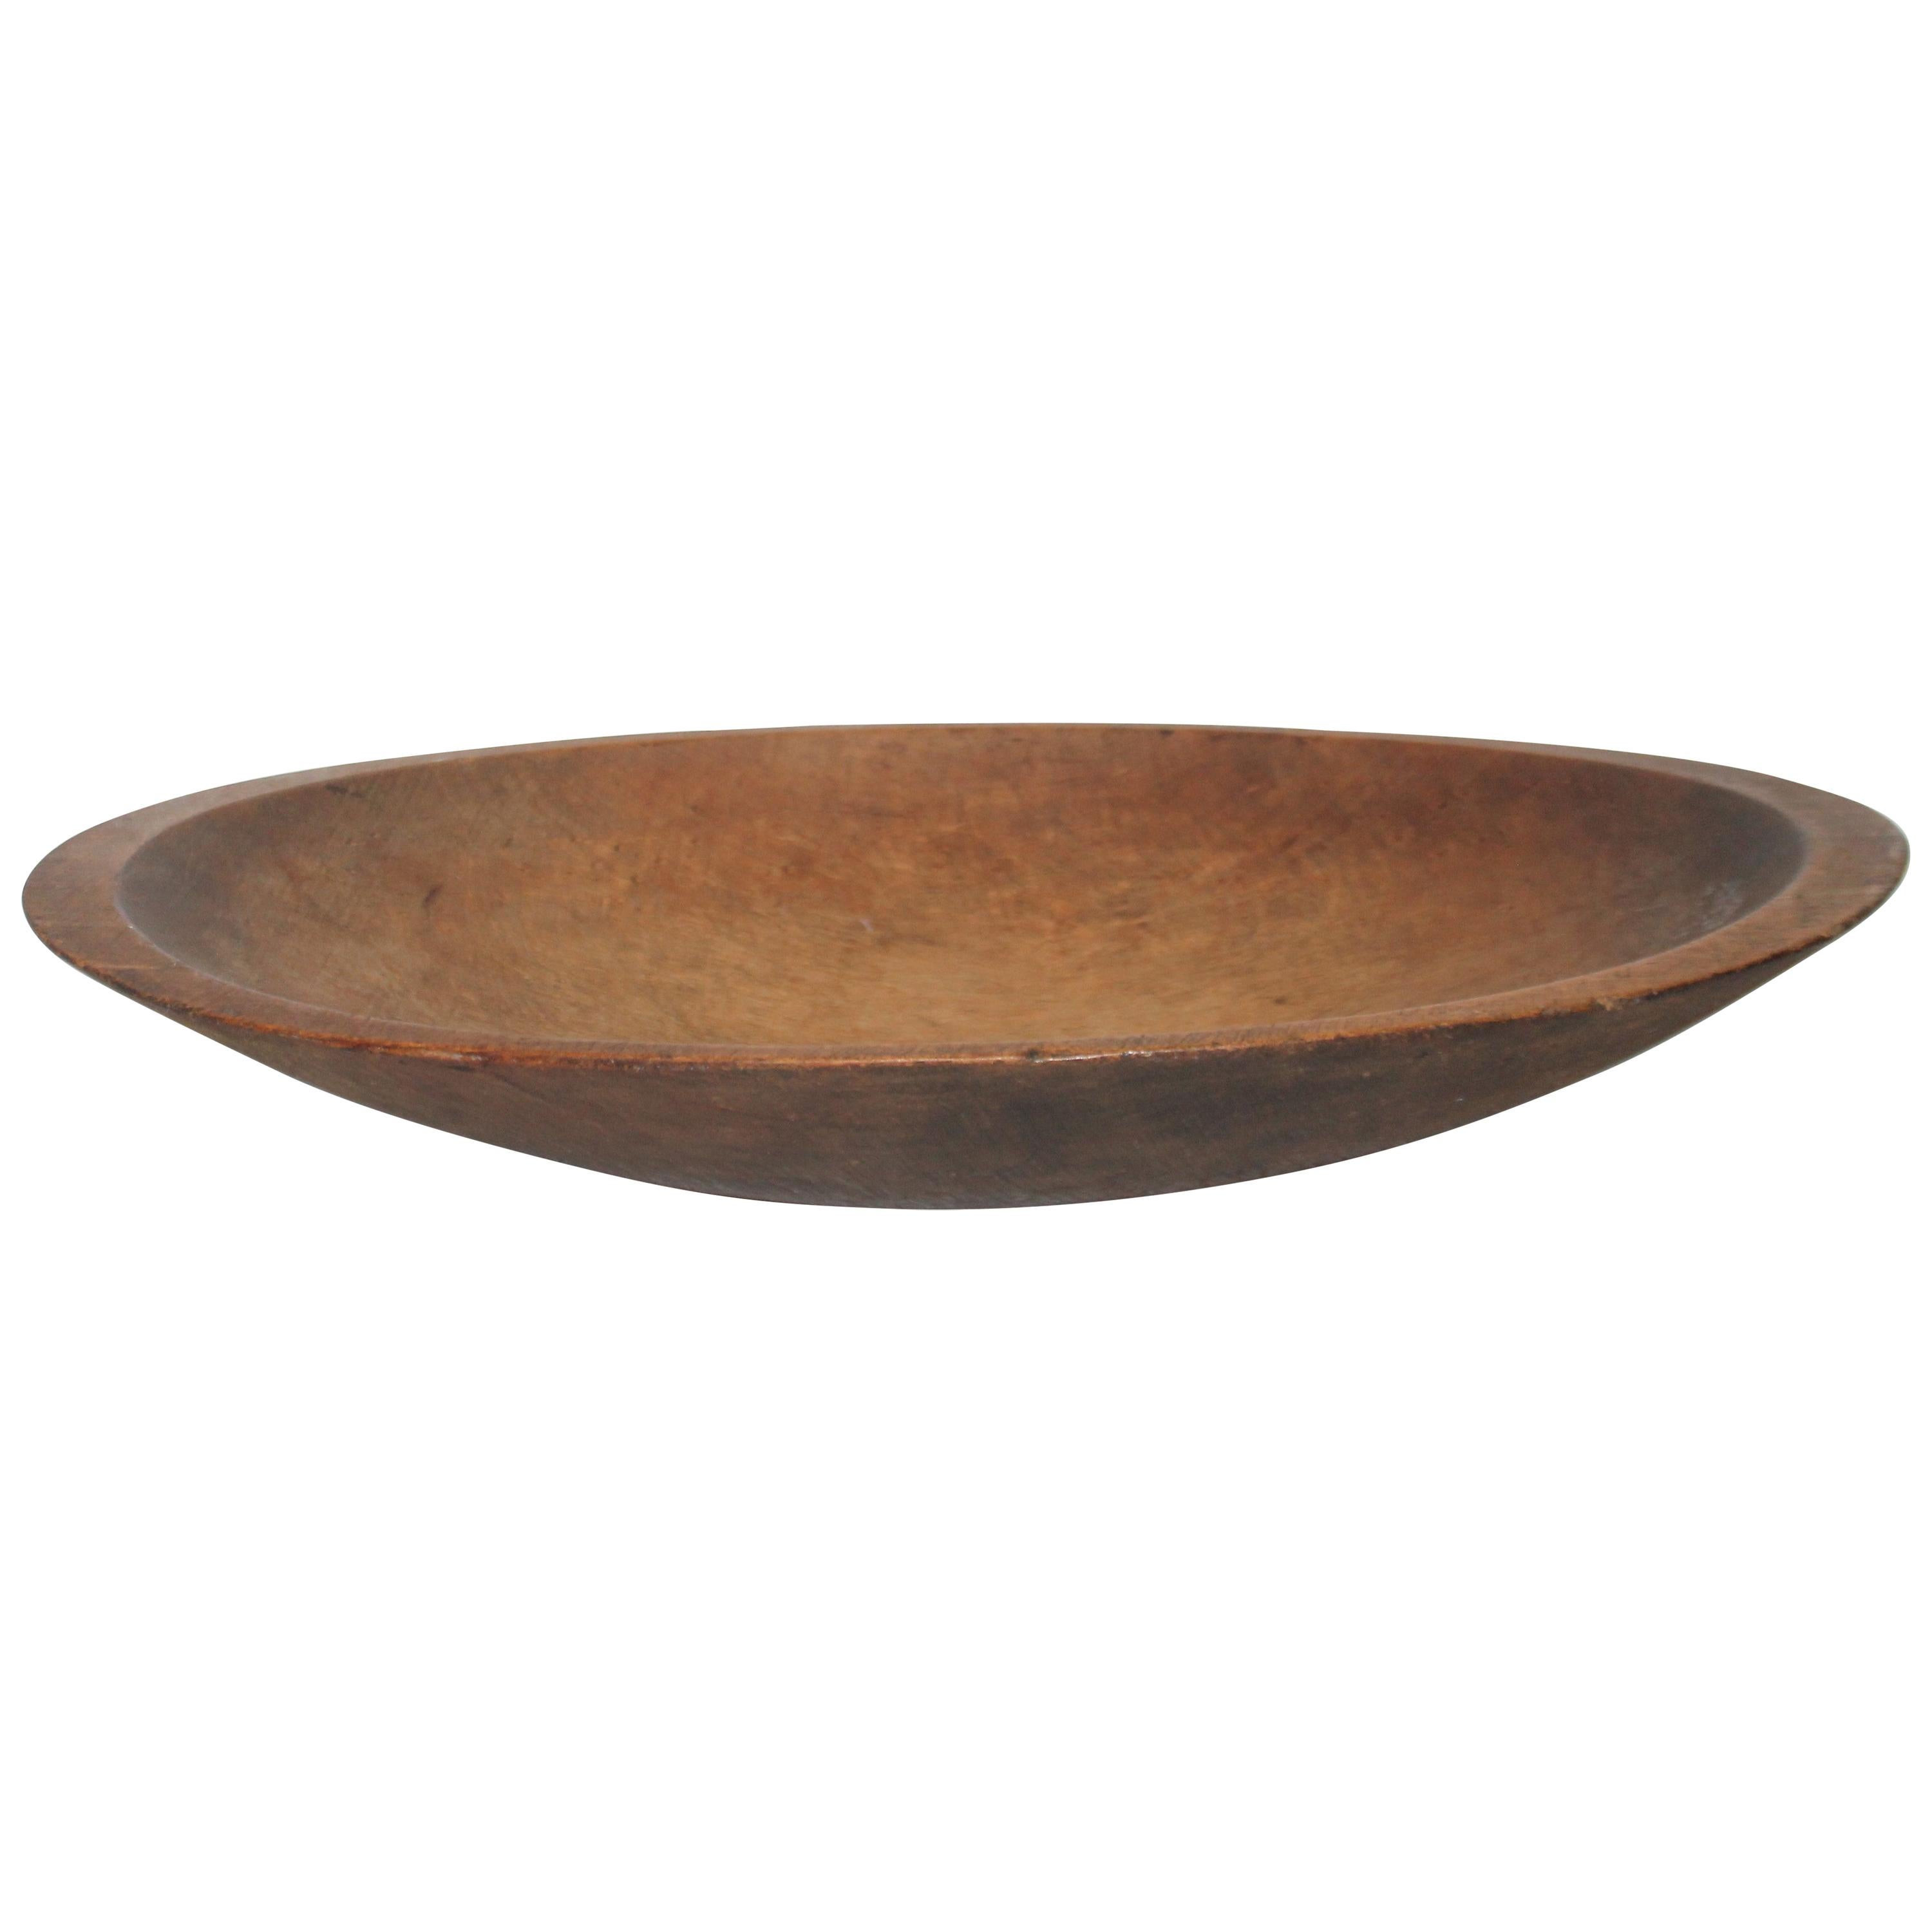 19th Century Oval Dough Bowl from New England